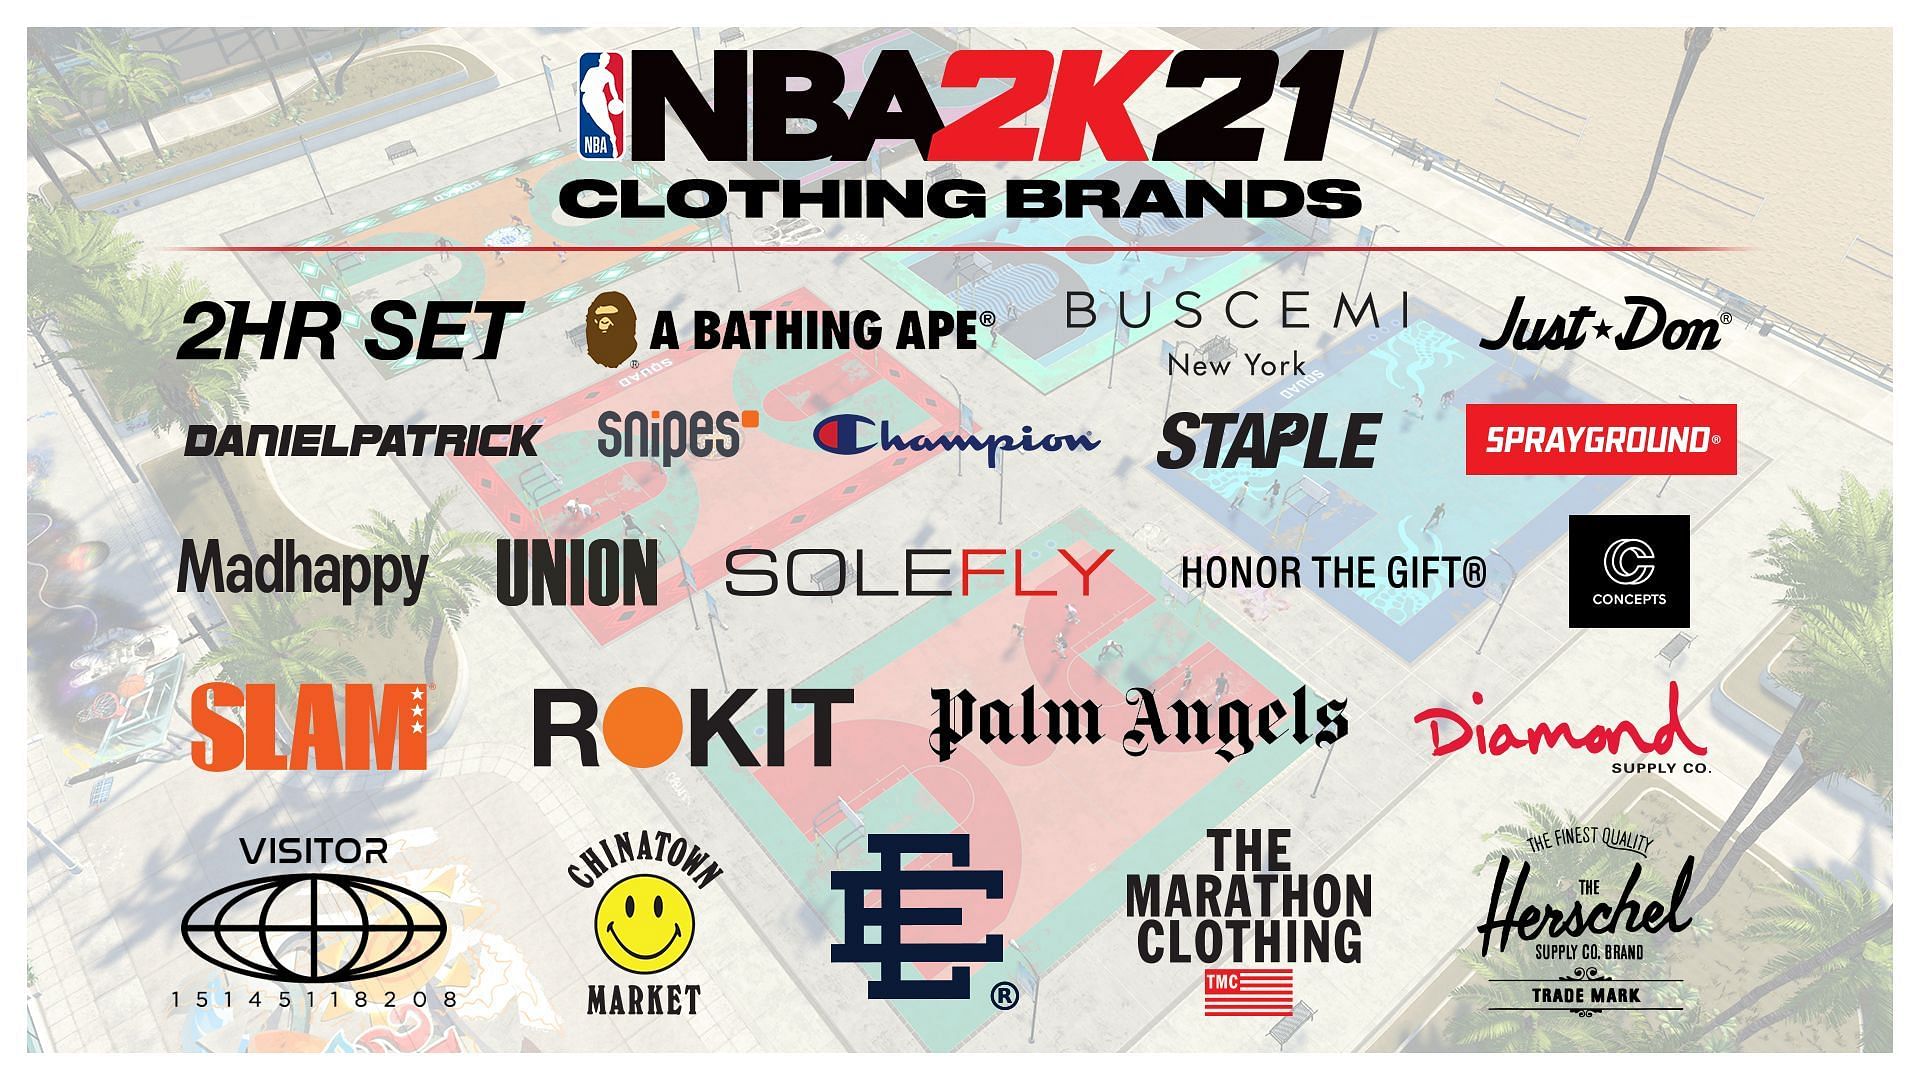 NBA 2K22 allows players to buy items from a range of stores. (Image via NBA 2K22)